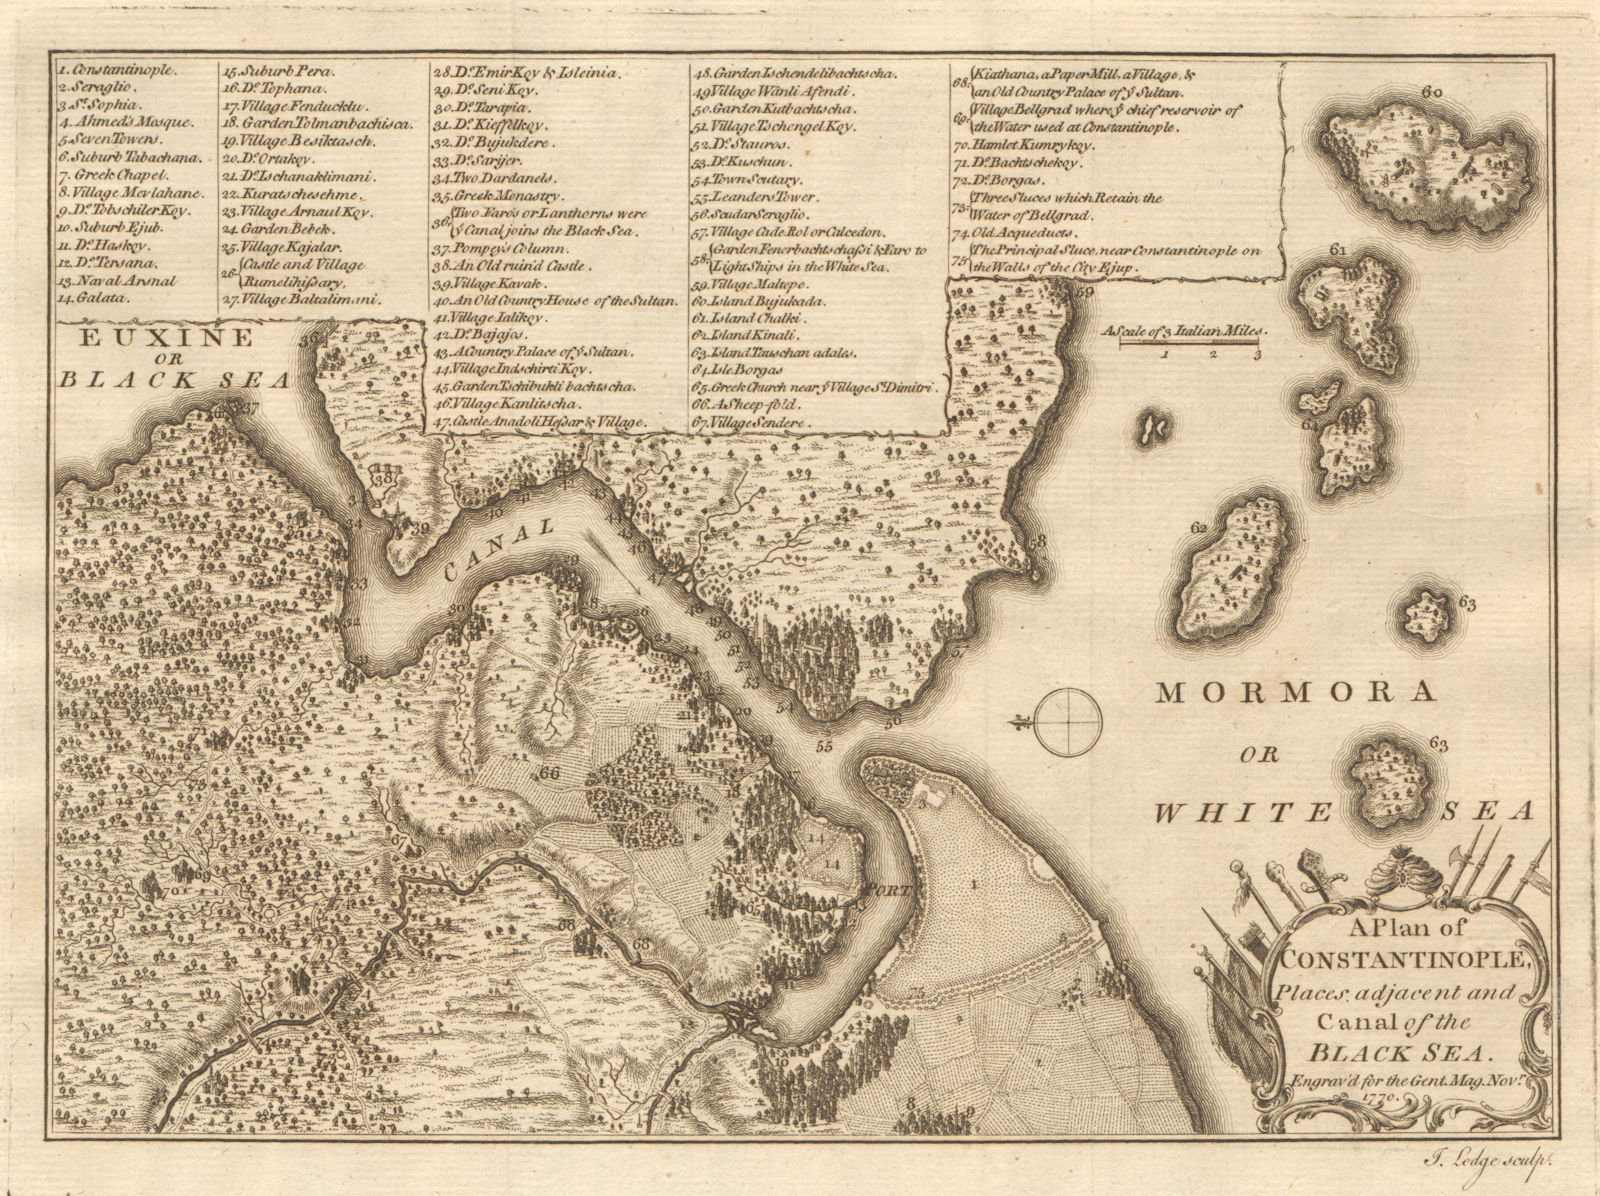 Associate Product Constantinople… & canal of the Black Sea. Istanbul & Bosphorus. LODGE 1770 map